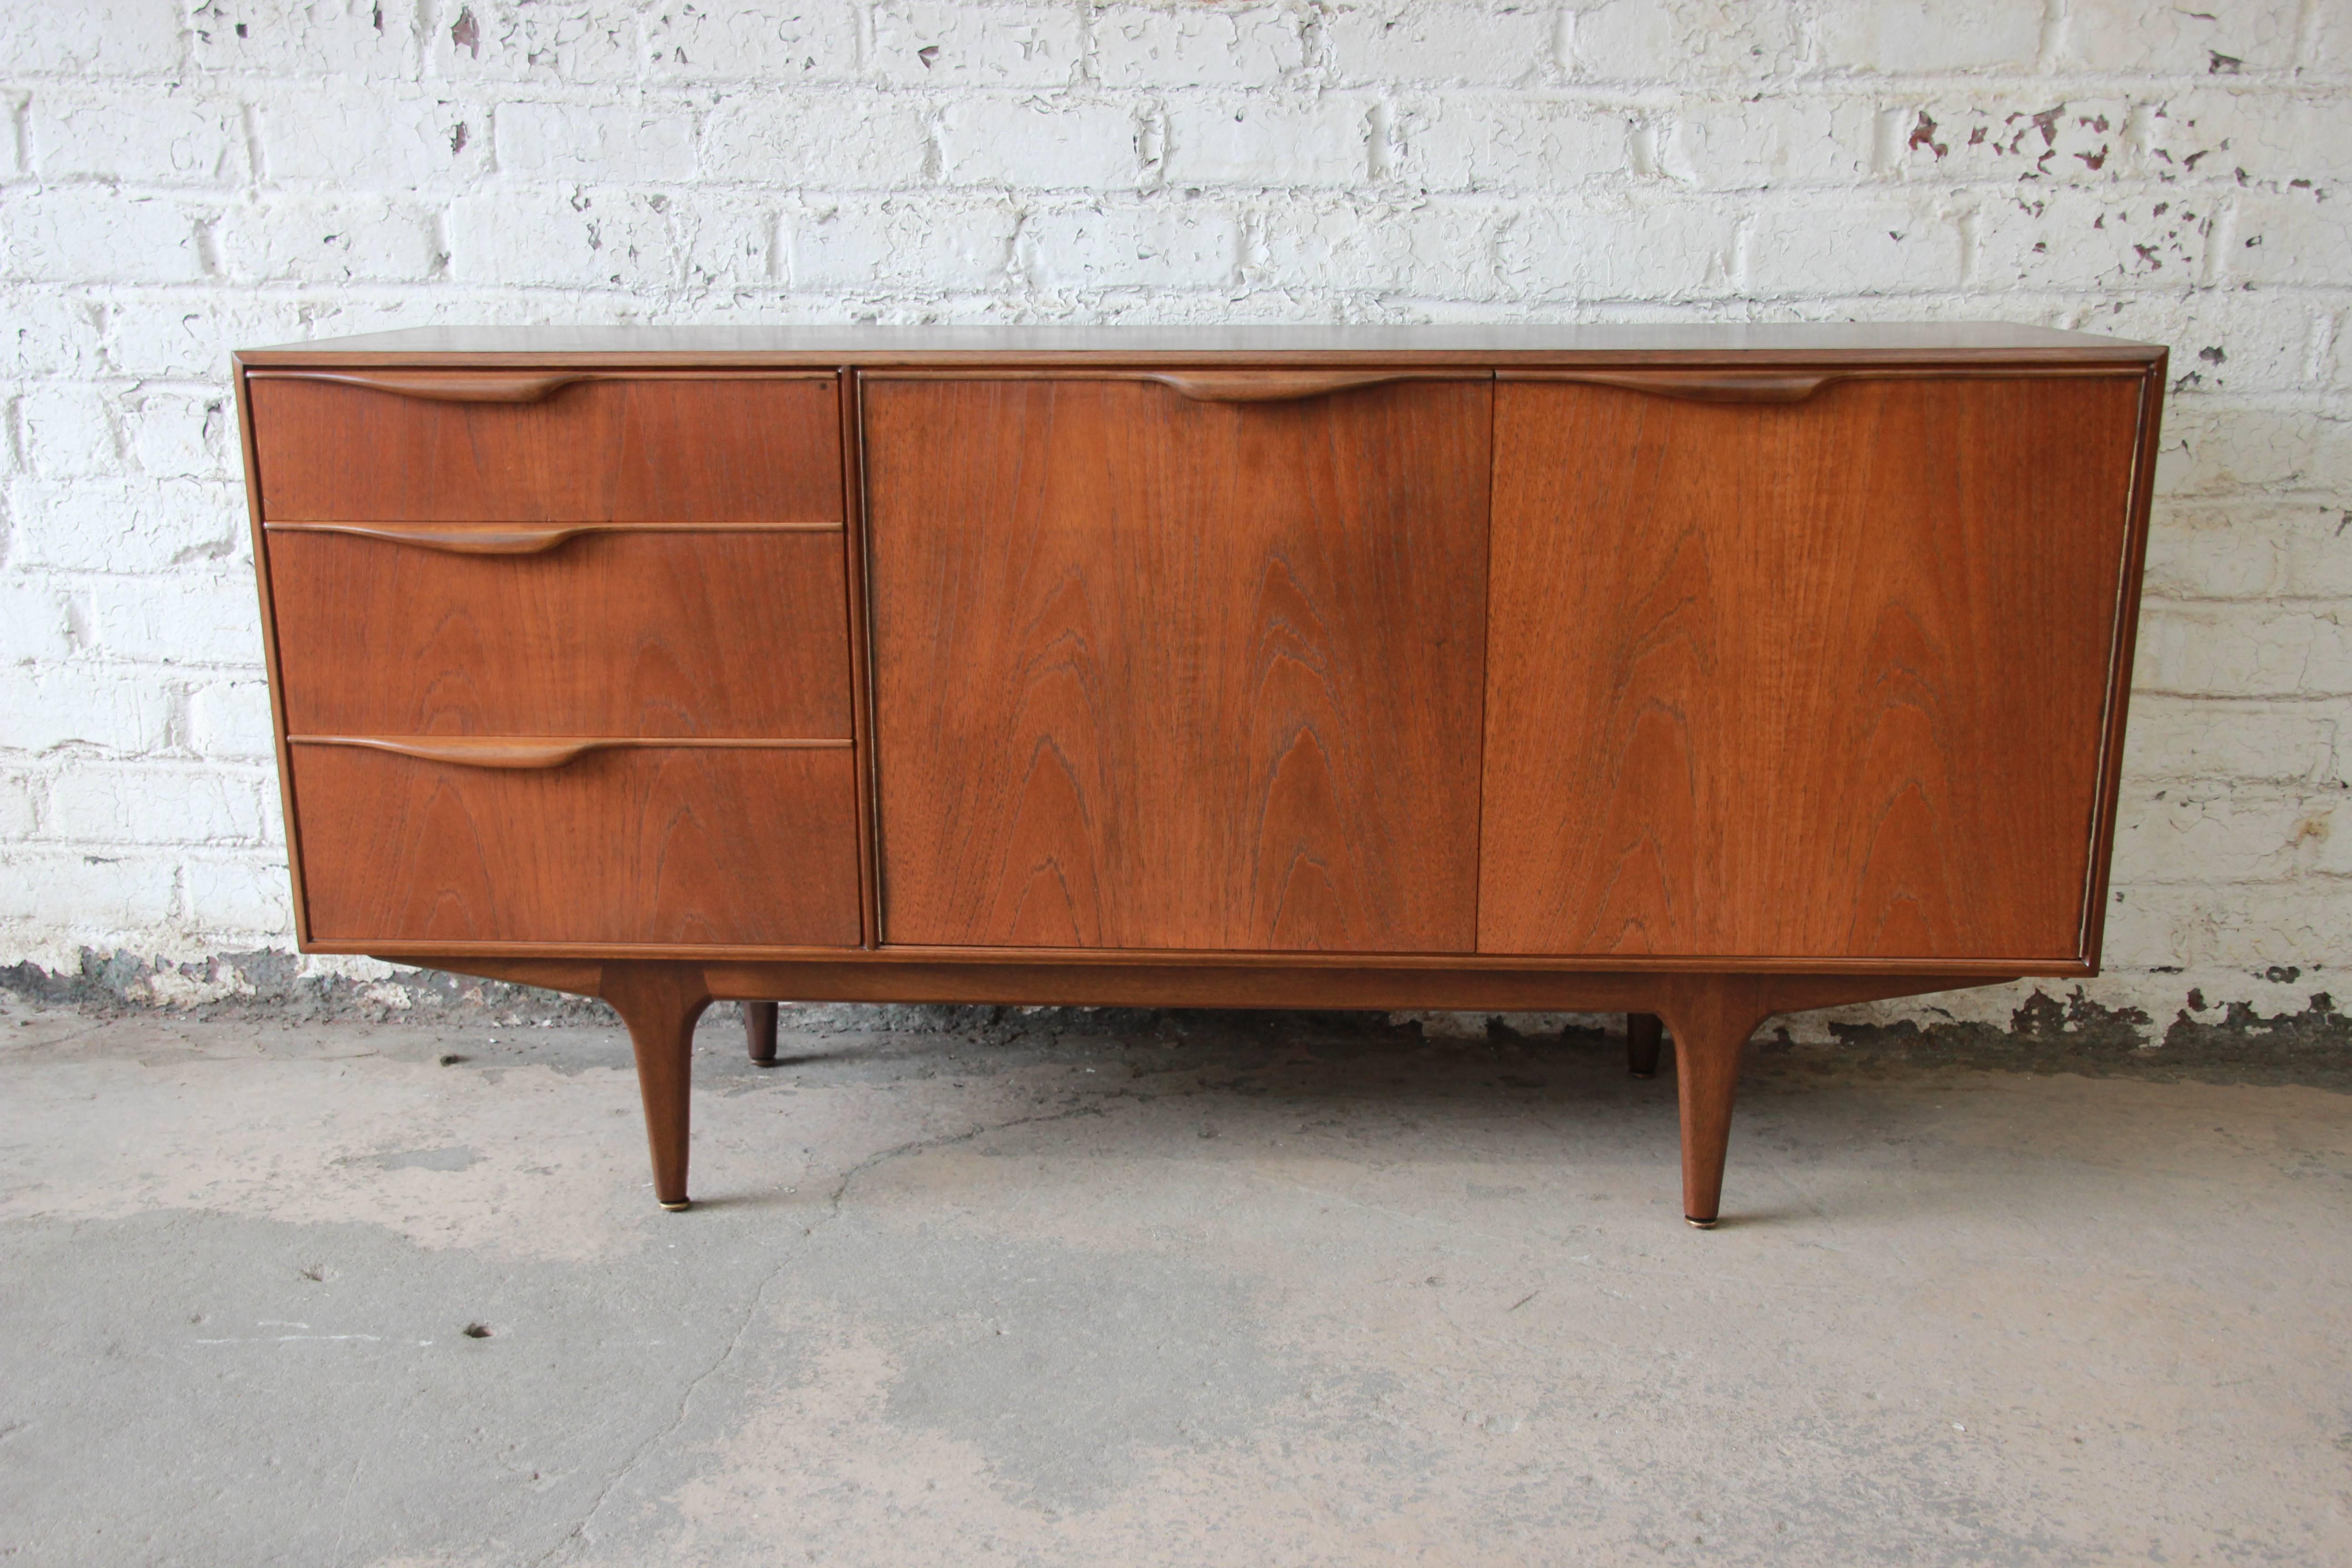 A newly refinished Danish modern style teak sideboard credenza designed by Tom Robertson for A.H. McIntosh. The sideboard features gorgeous teak wood grain and sleek mid-century modern design, with sculpted solid teak drawer pulls. It offers ample